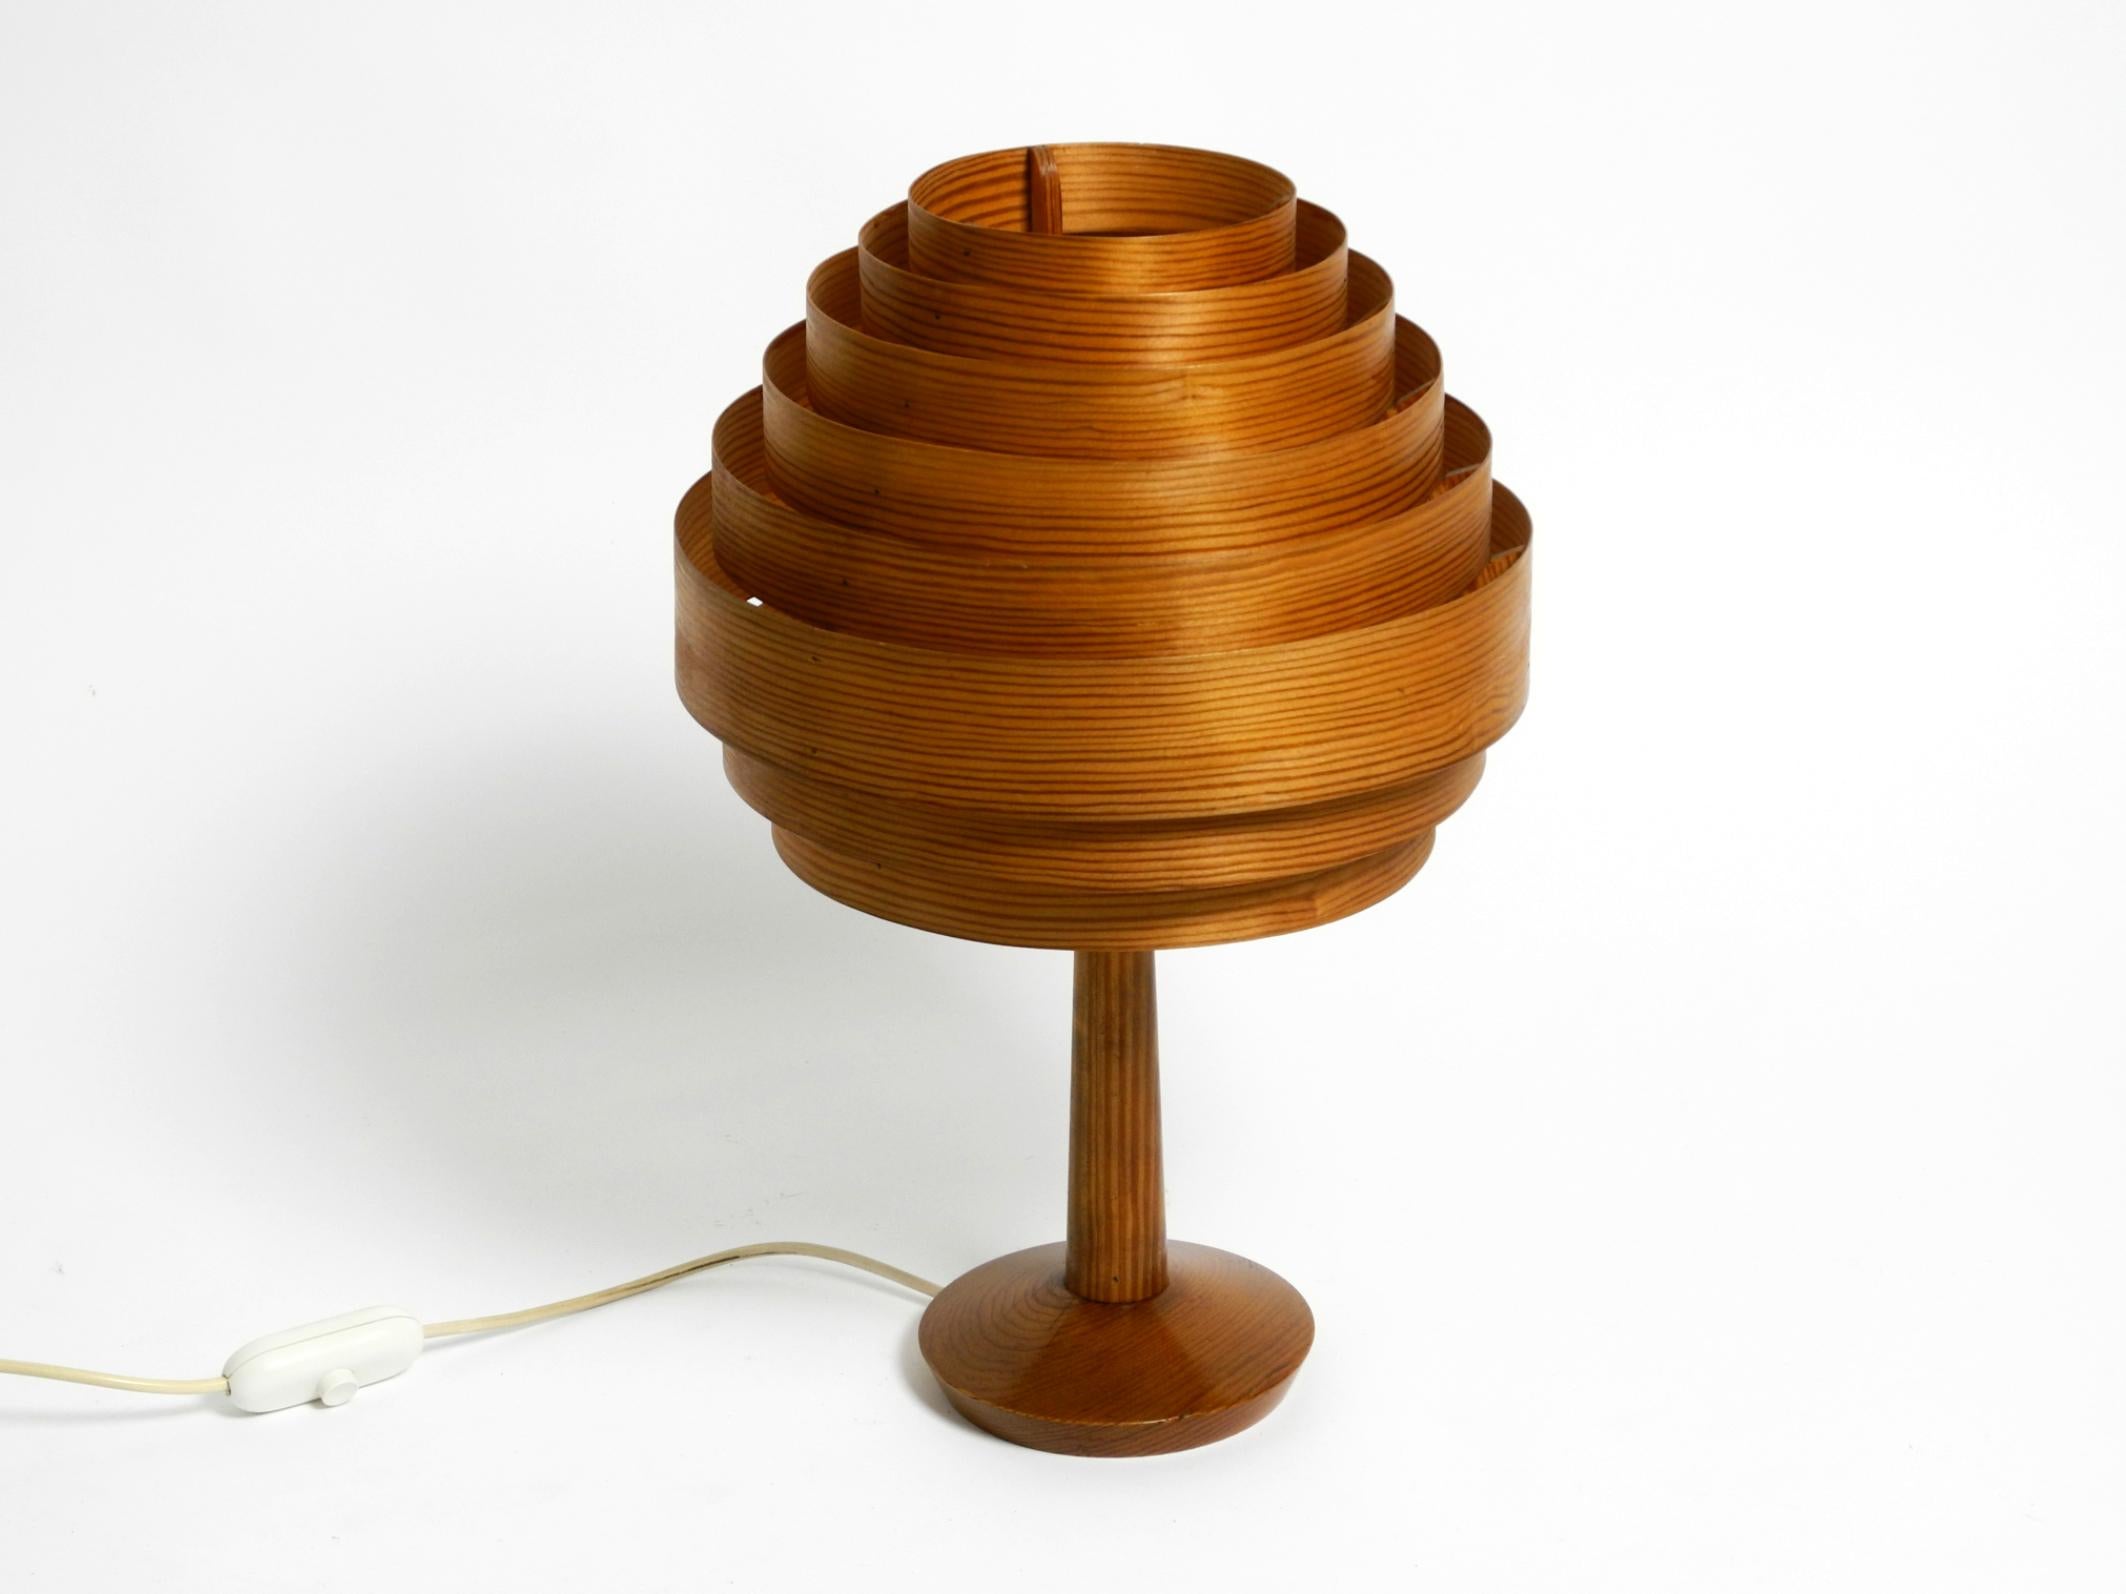 Beautiful 1960s pine veneer slat table lamp.
Design by Hans Agne Jakobsson for Markaryd. Made in Sweden.
Beautiful Swedish classic from the 1960s.
Very good vintage condition and fully functional.
No damage to the entire lamp. No cracks on the